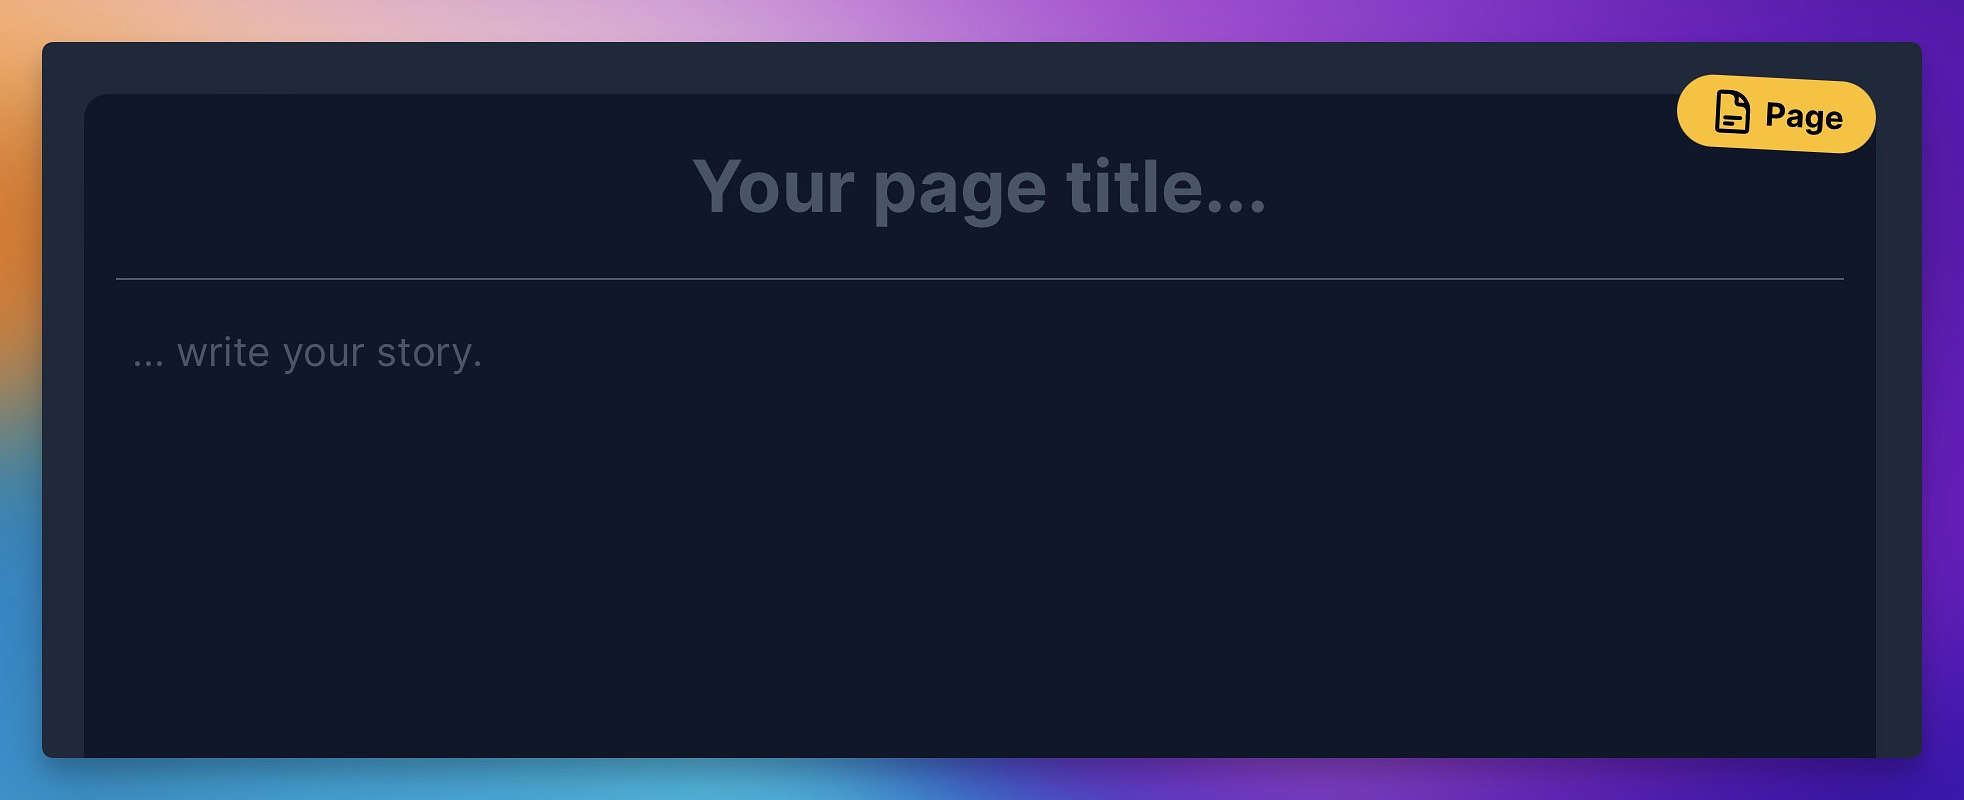 A page badge in the top right of the editor when the Page checkbox is ticked.